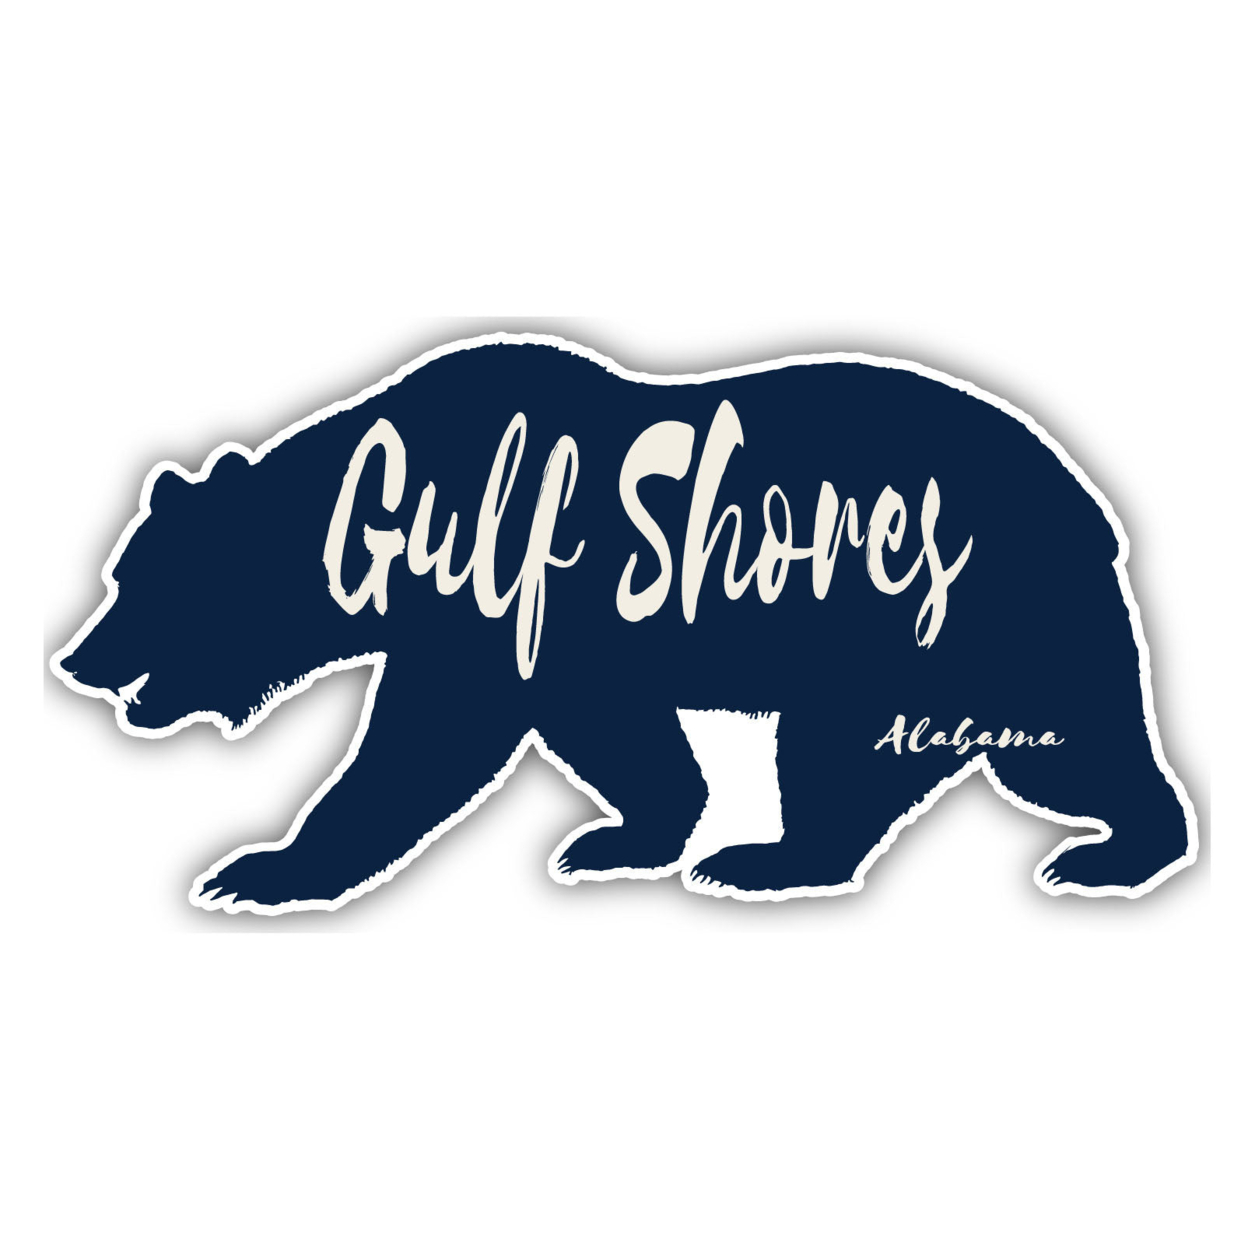 Gulf Shores Alabama Souvenir Decorative Stickers (Choose Theme And Size) - 4-Pack, 8-Inch, Camp Life